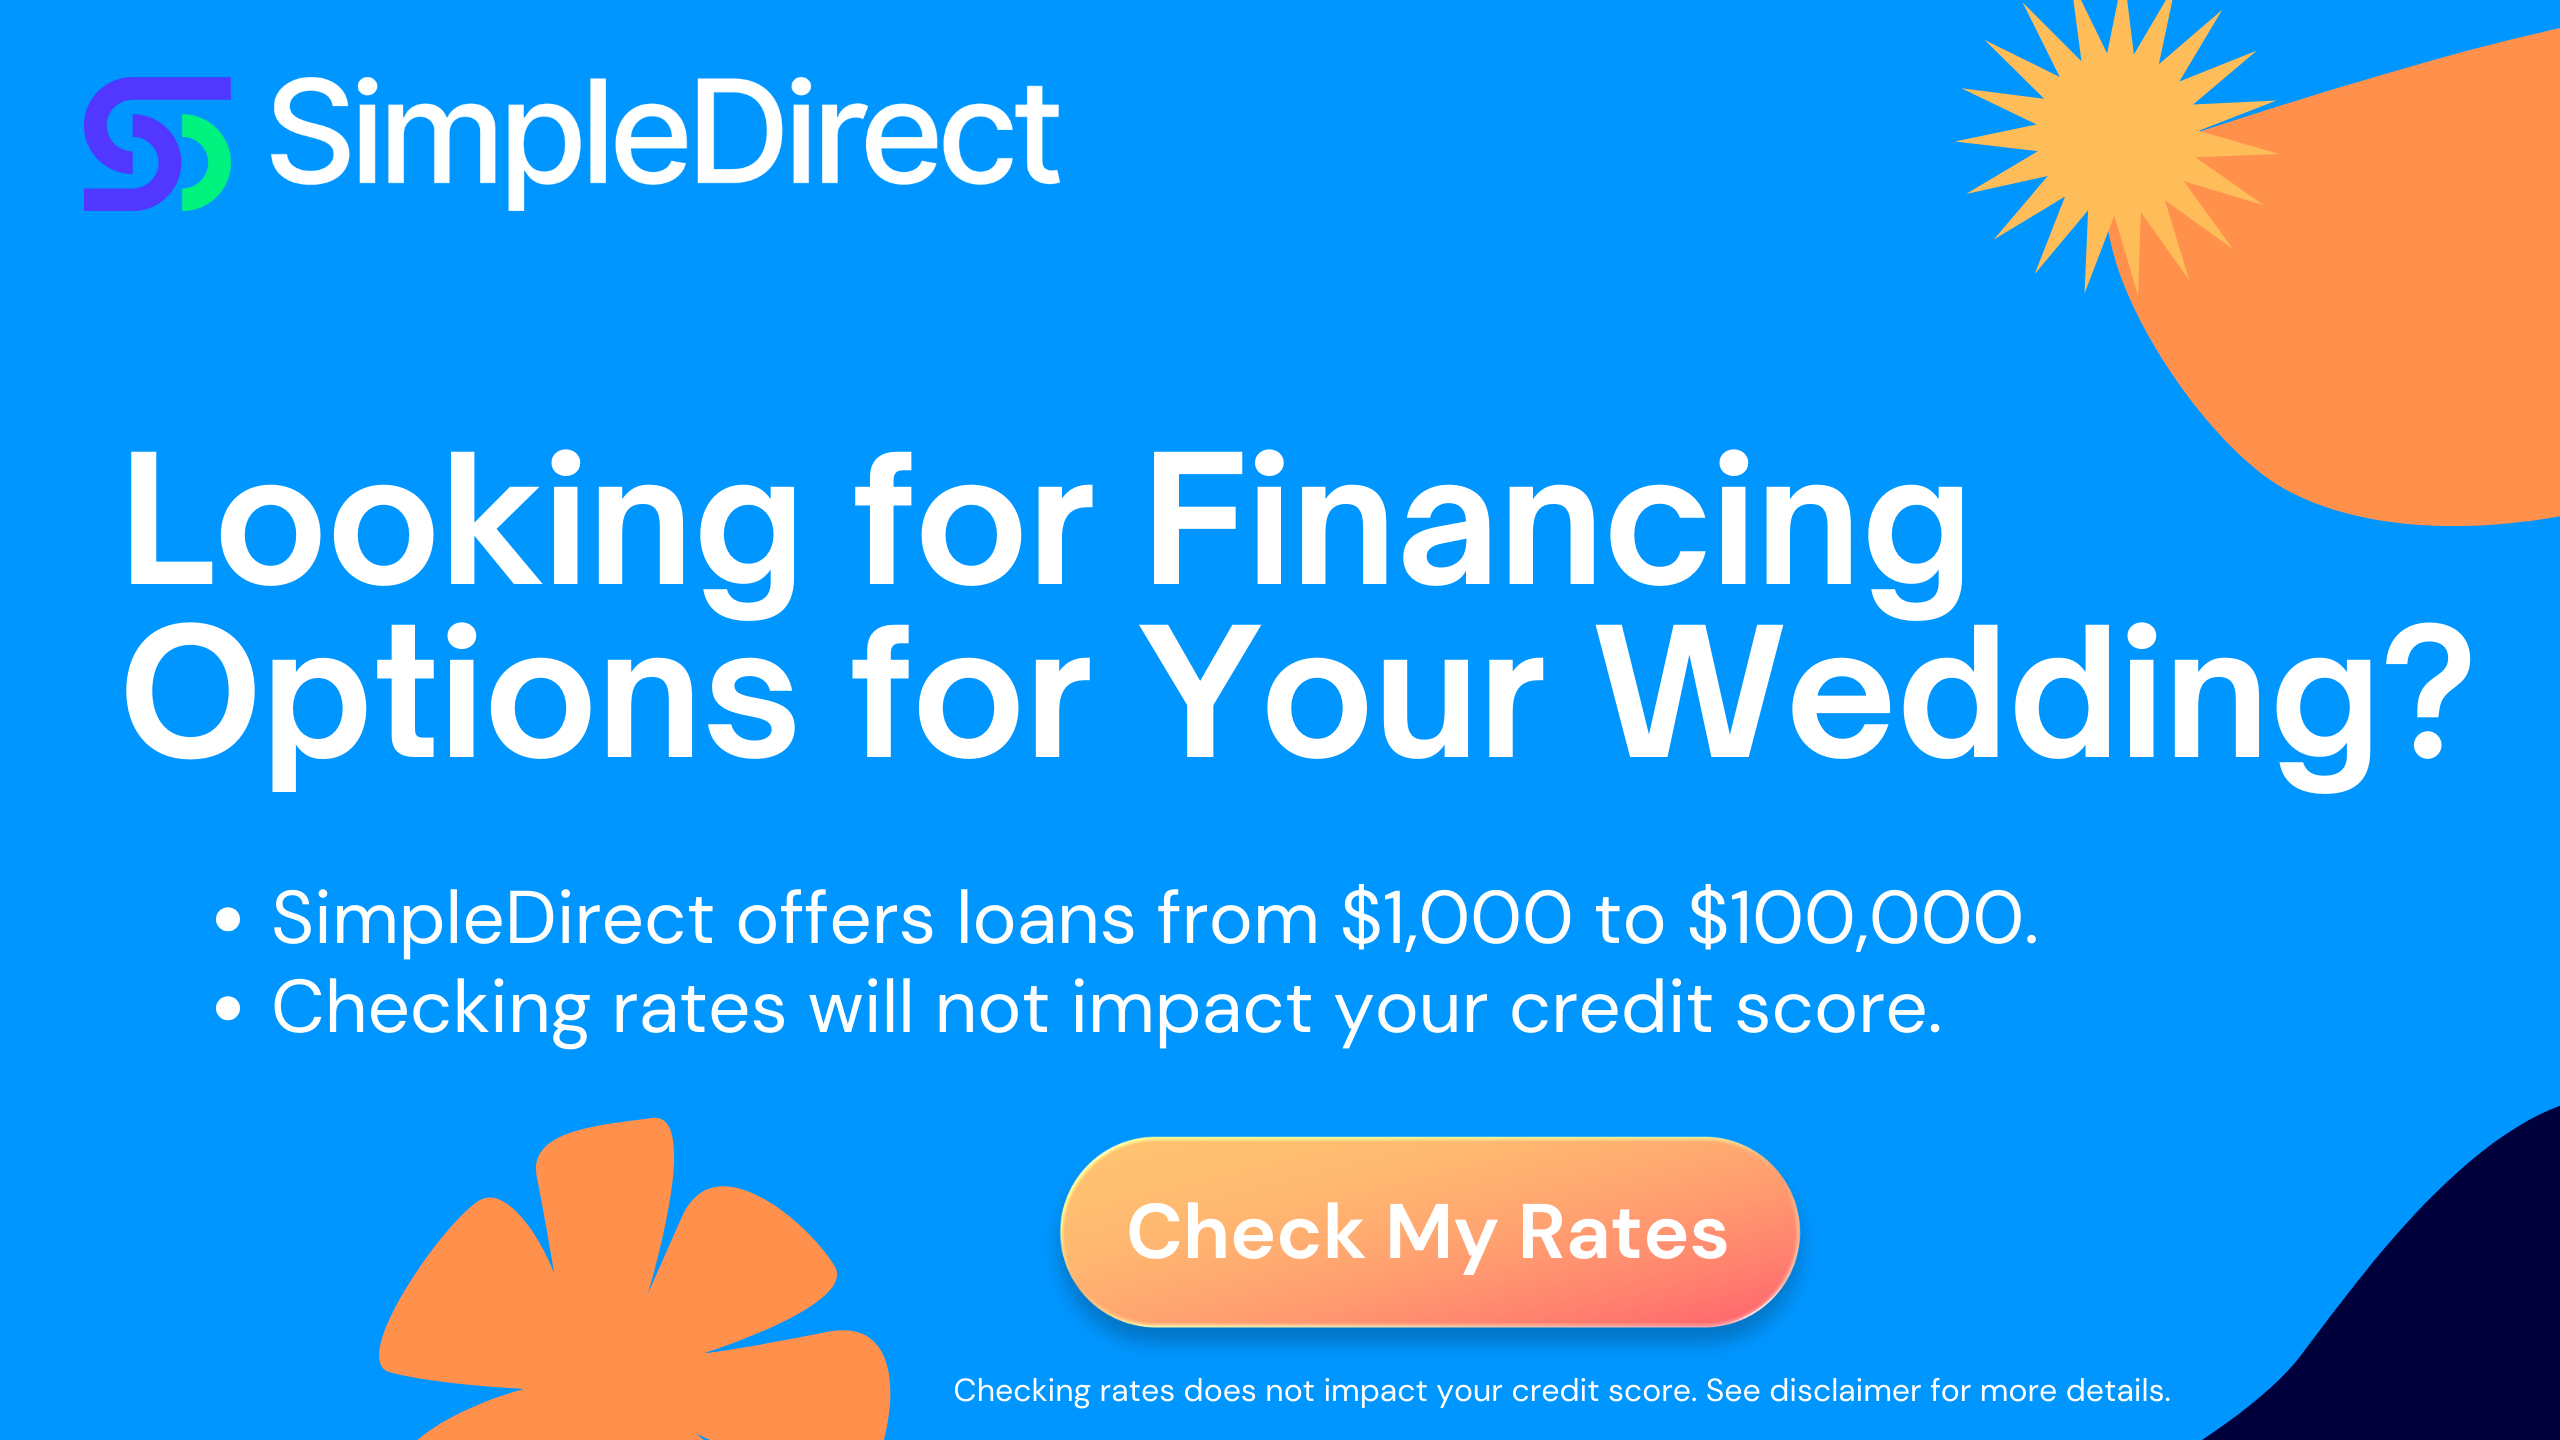 SimpleDirect can provide flexibile financing options for your wedding.